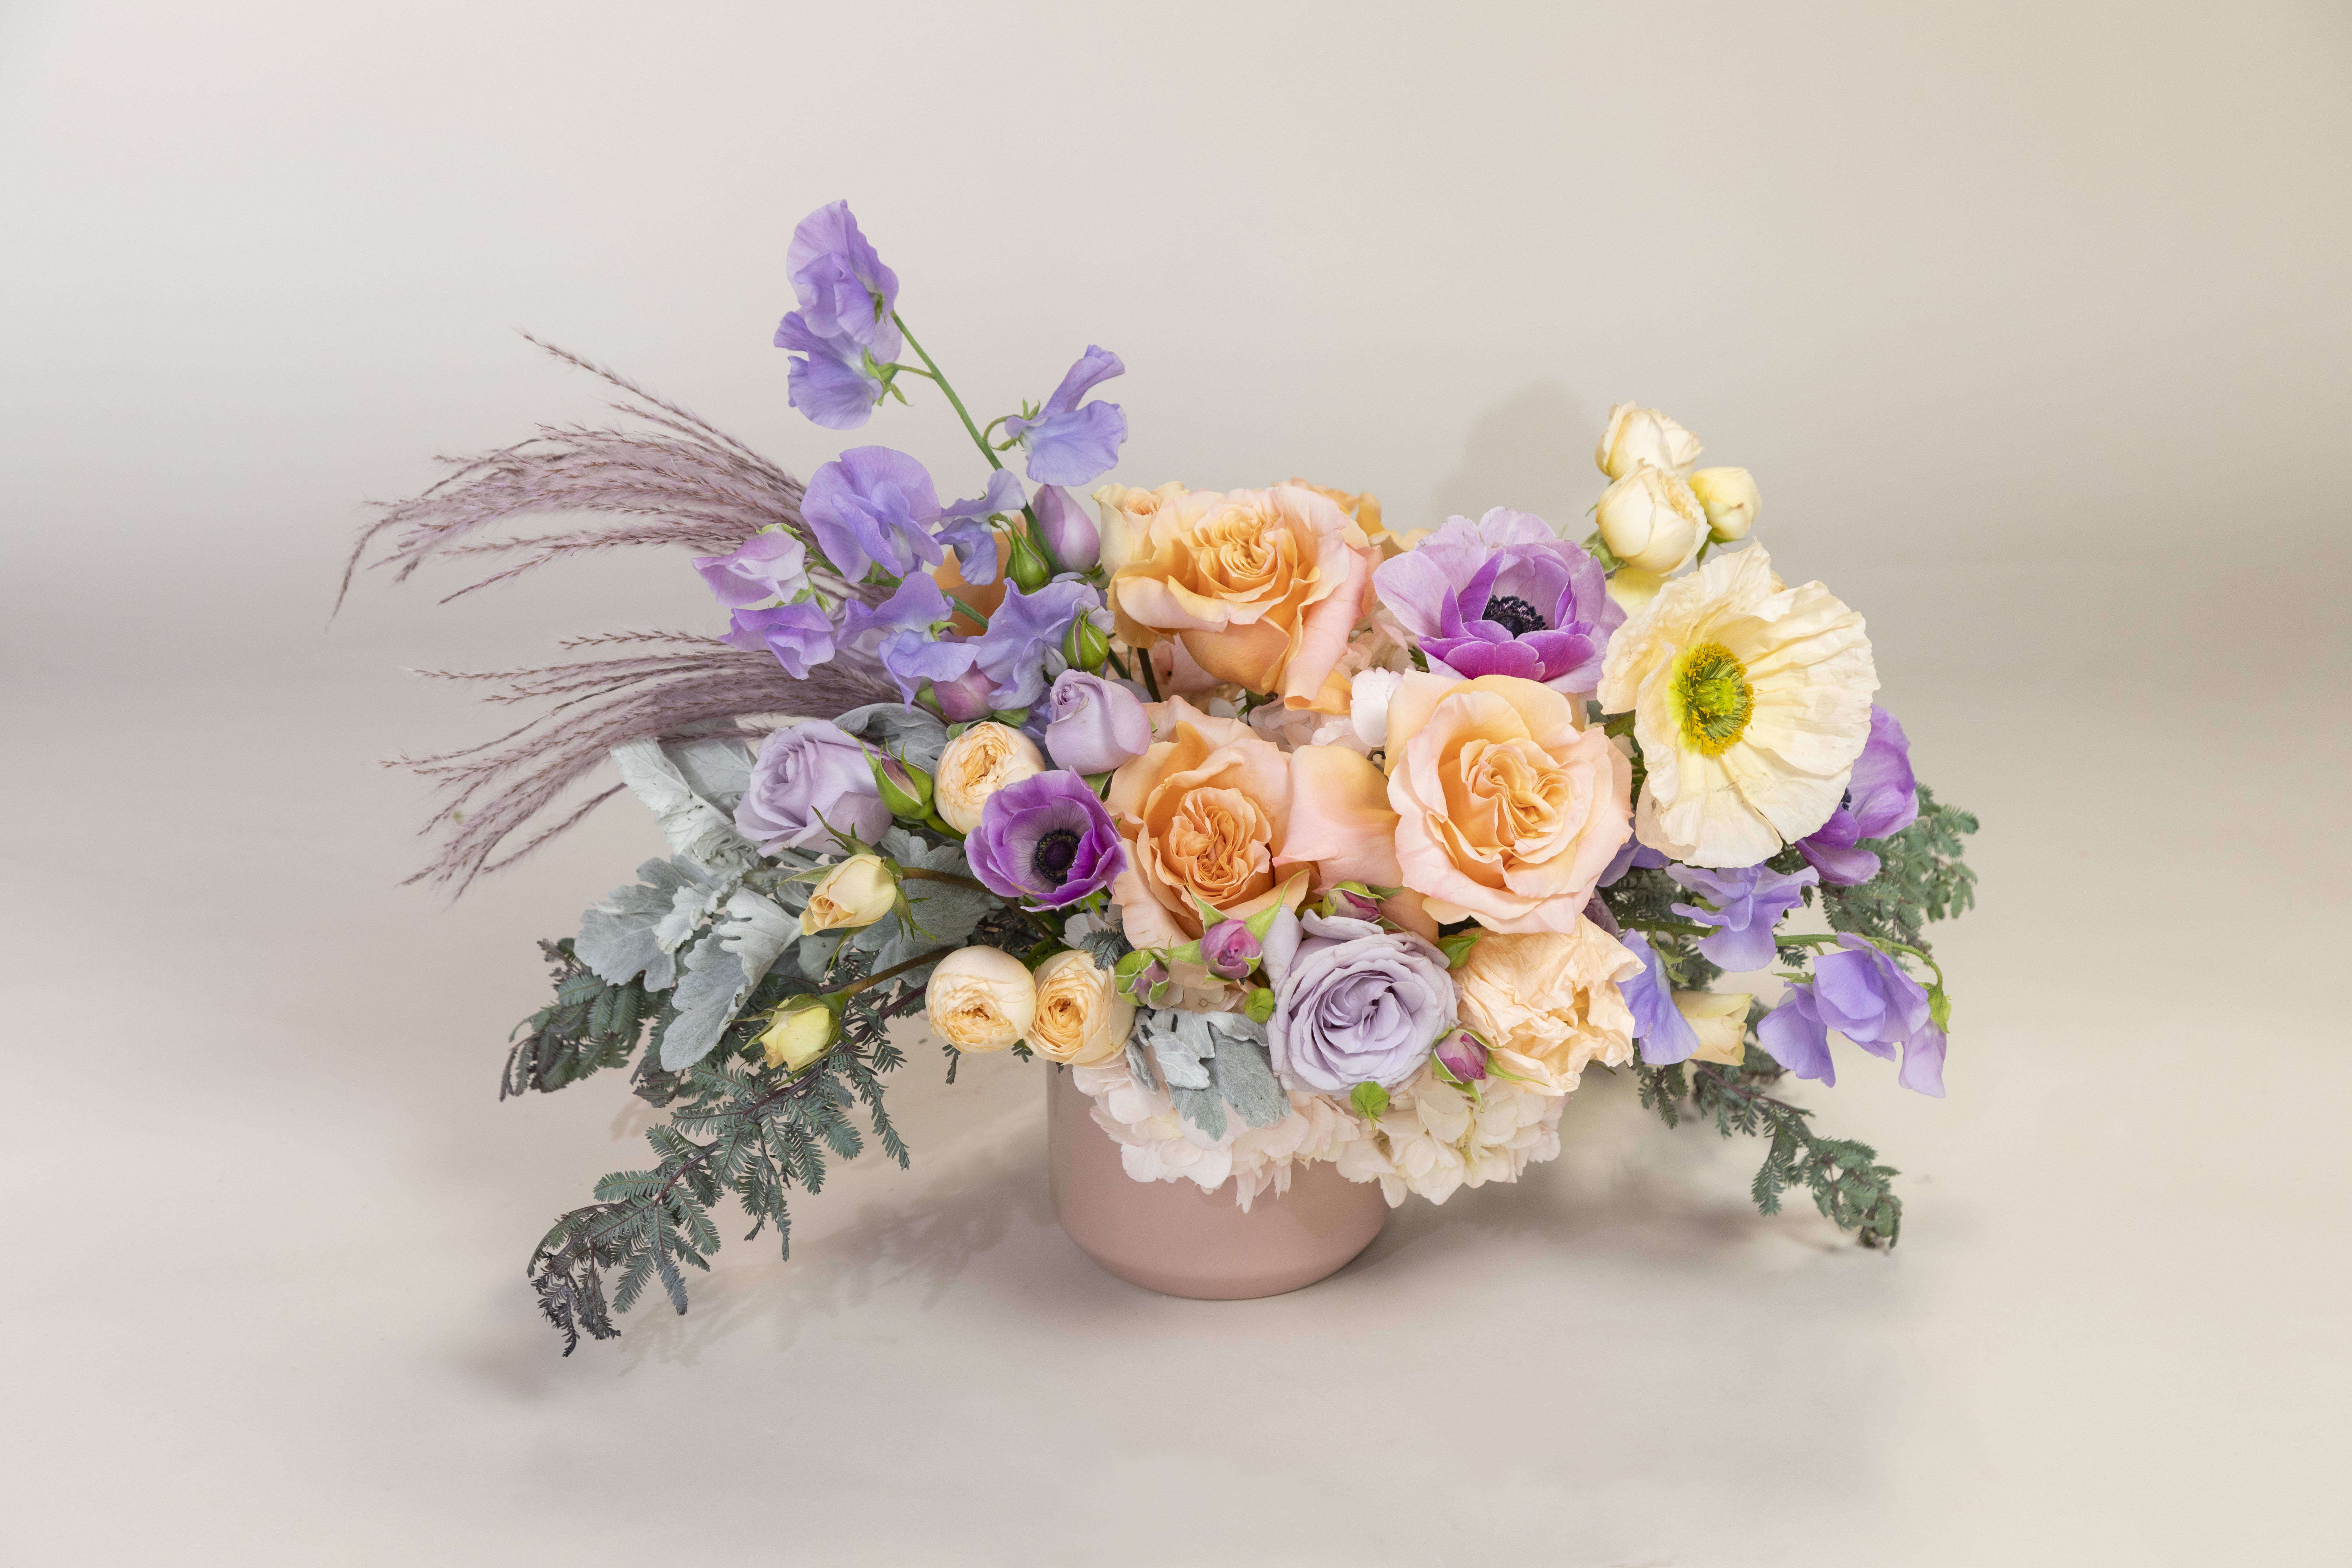 Juliet's Charm - This arrangement is filled with spring blooms including garden roses, poppies, sweet peas, anemones, and spray roses accented in soft colors of lavender and peach.